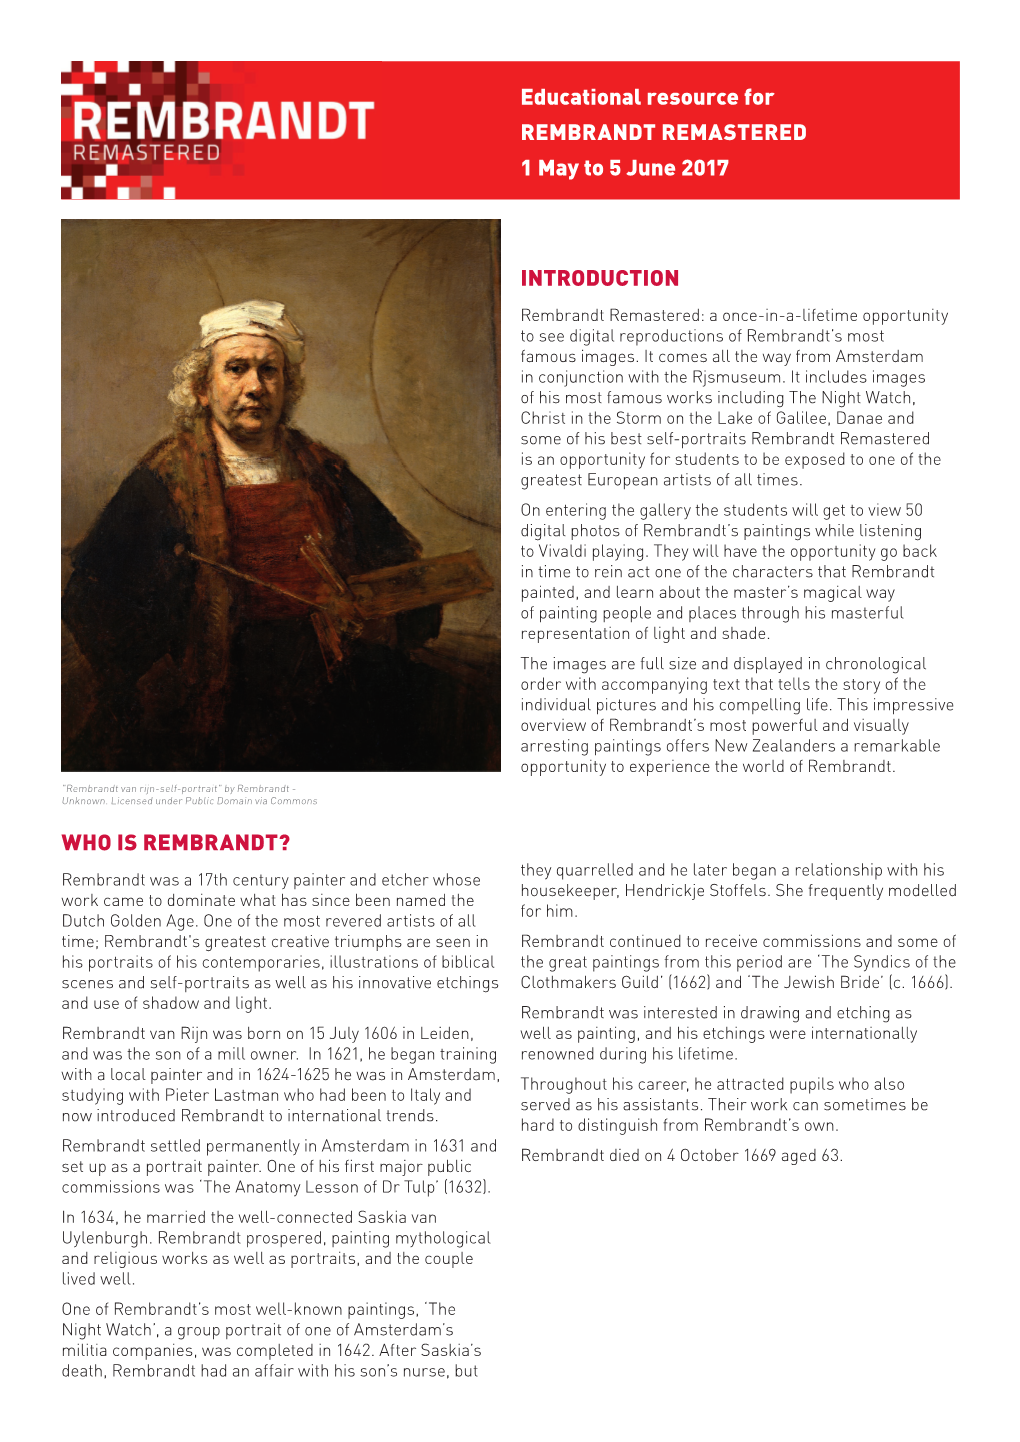 Educational Resource for REMBRANDT REMASTERED 1 May to 5 June 2017